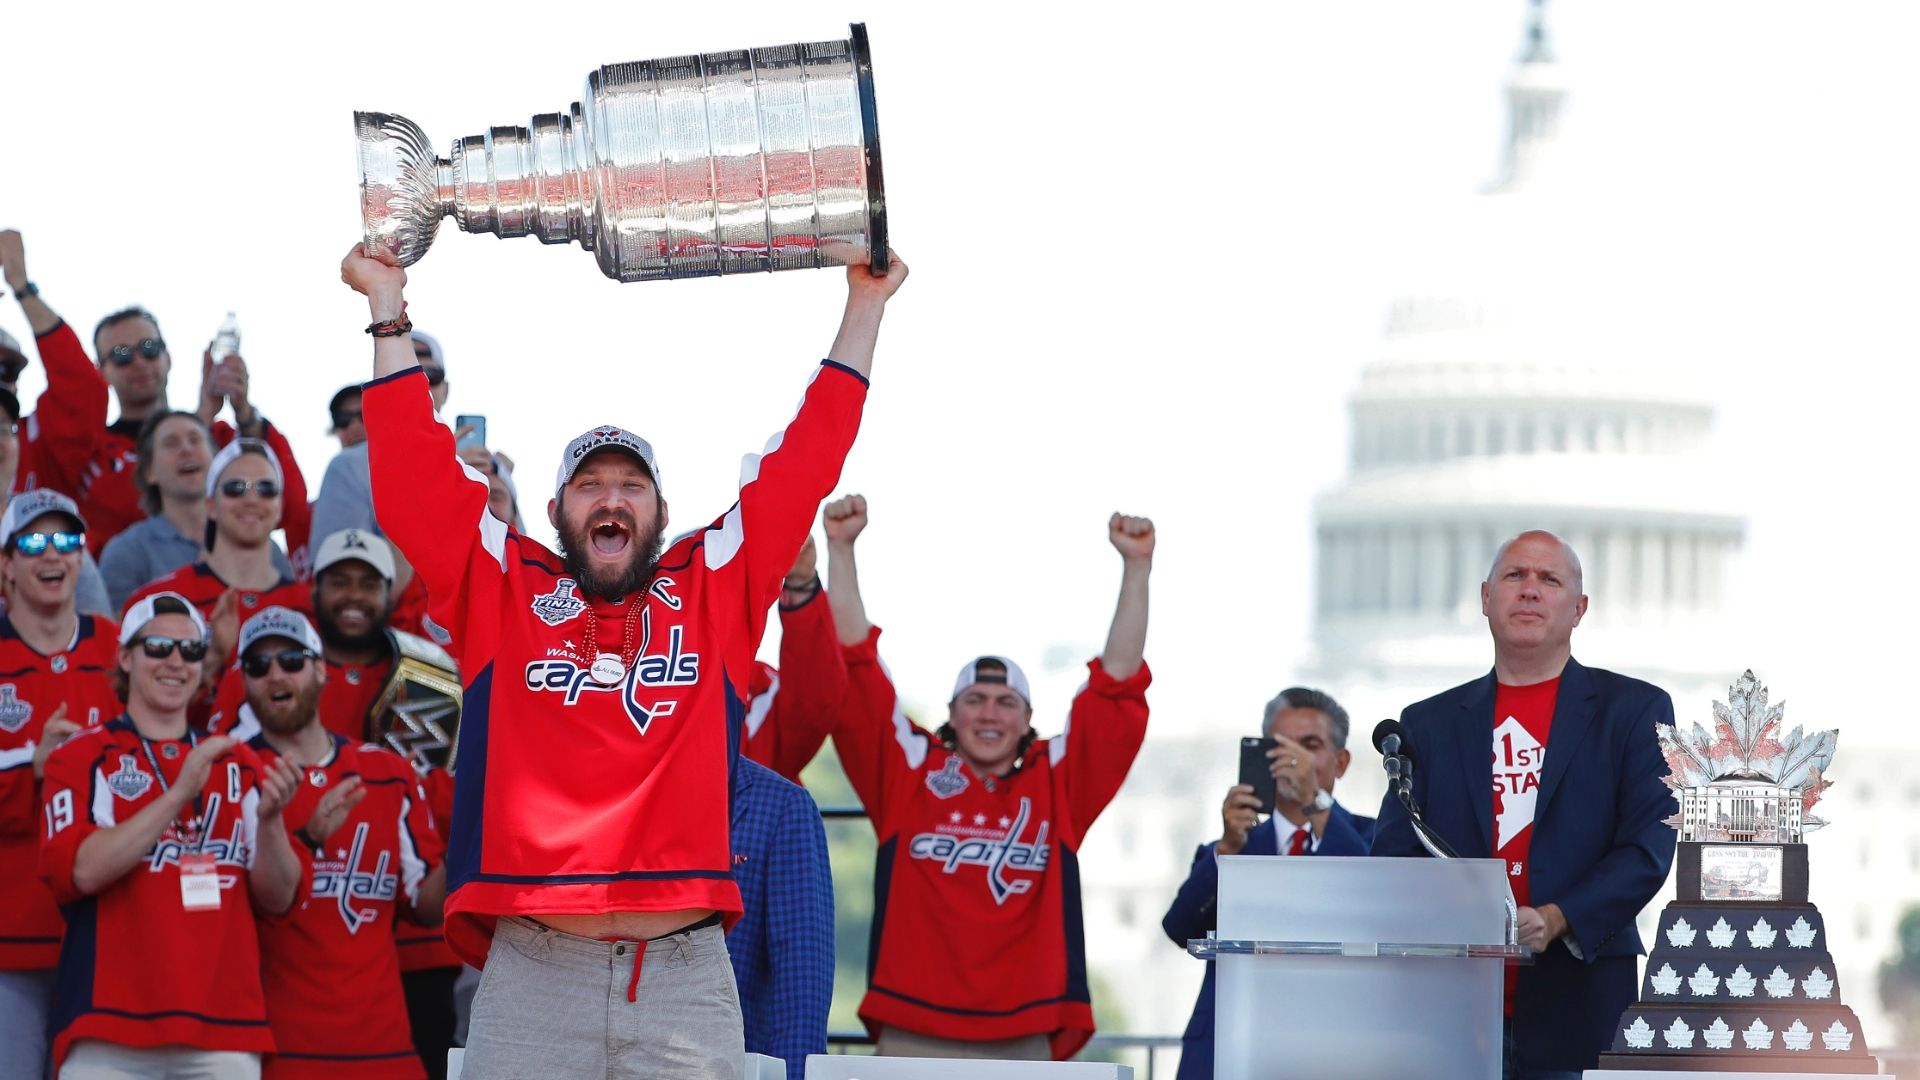 Washington Capitals Stanley Cup Ovechkin Celebration 